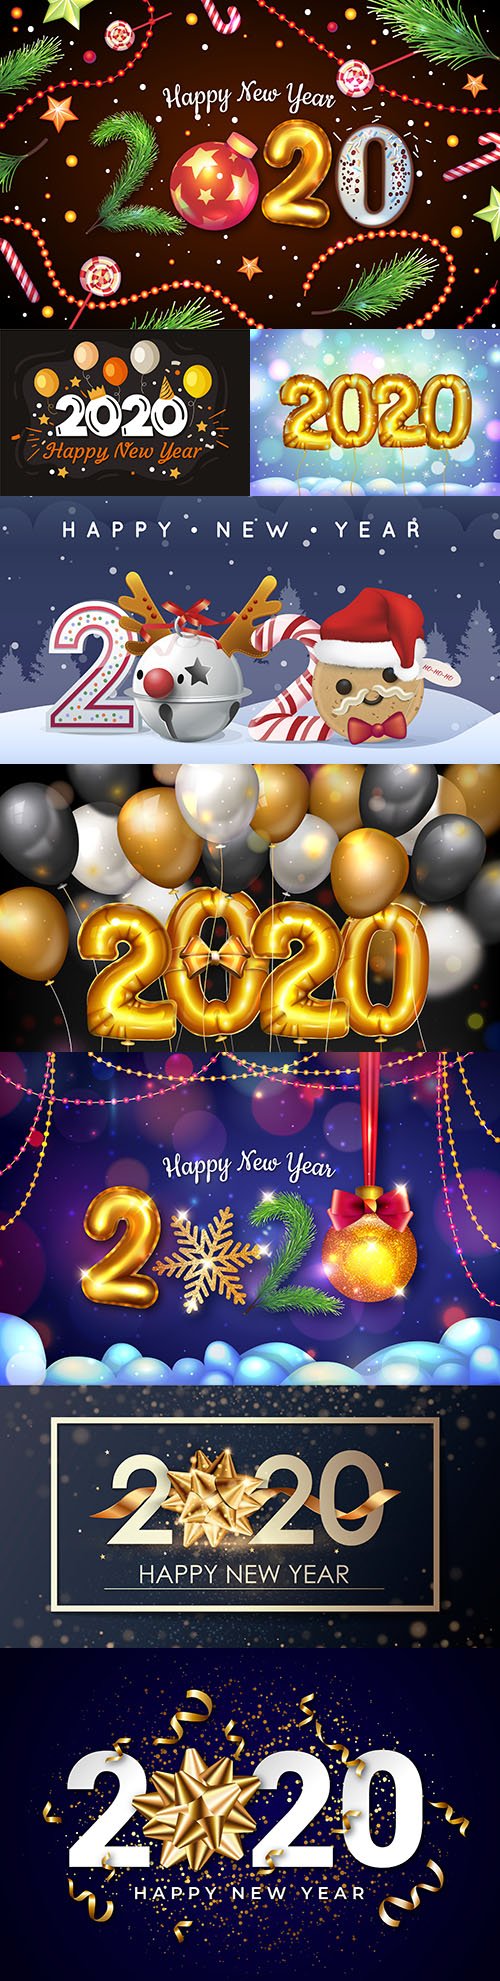 New Year and Christmas decorative 2020 illustration 18